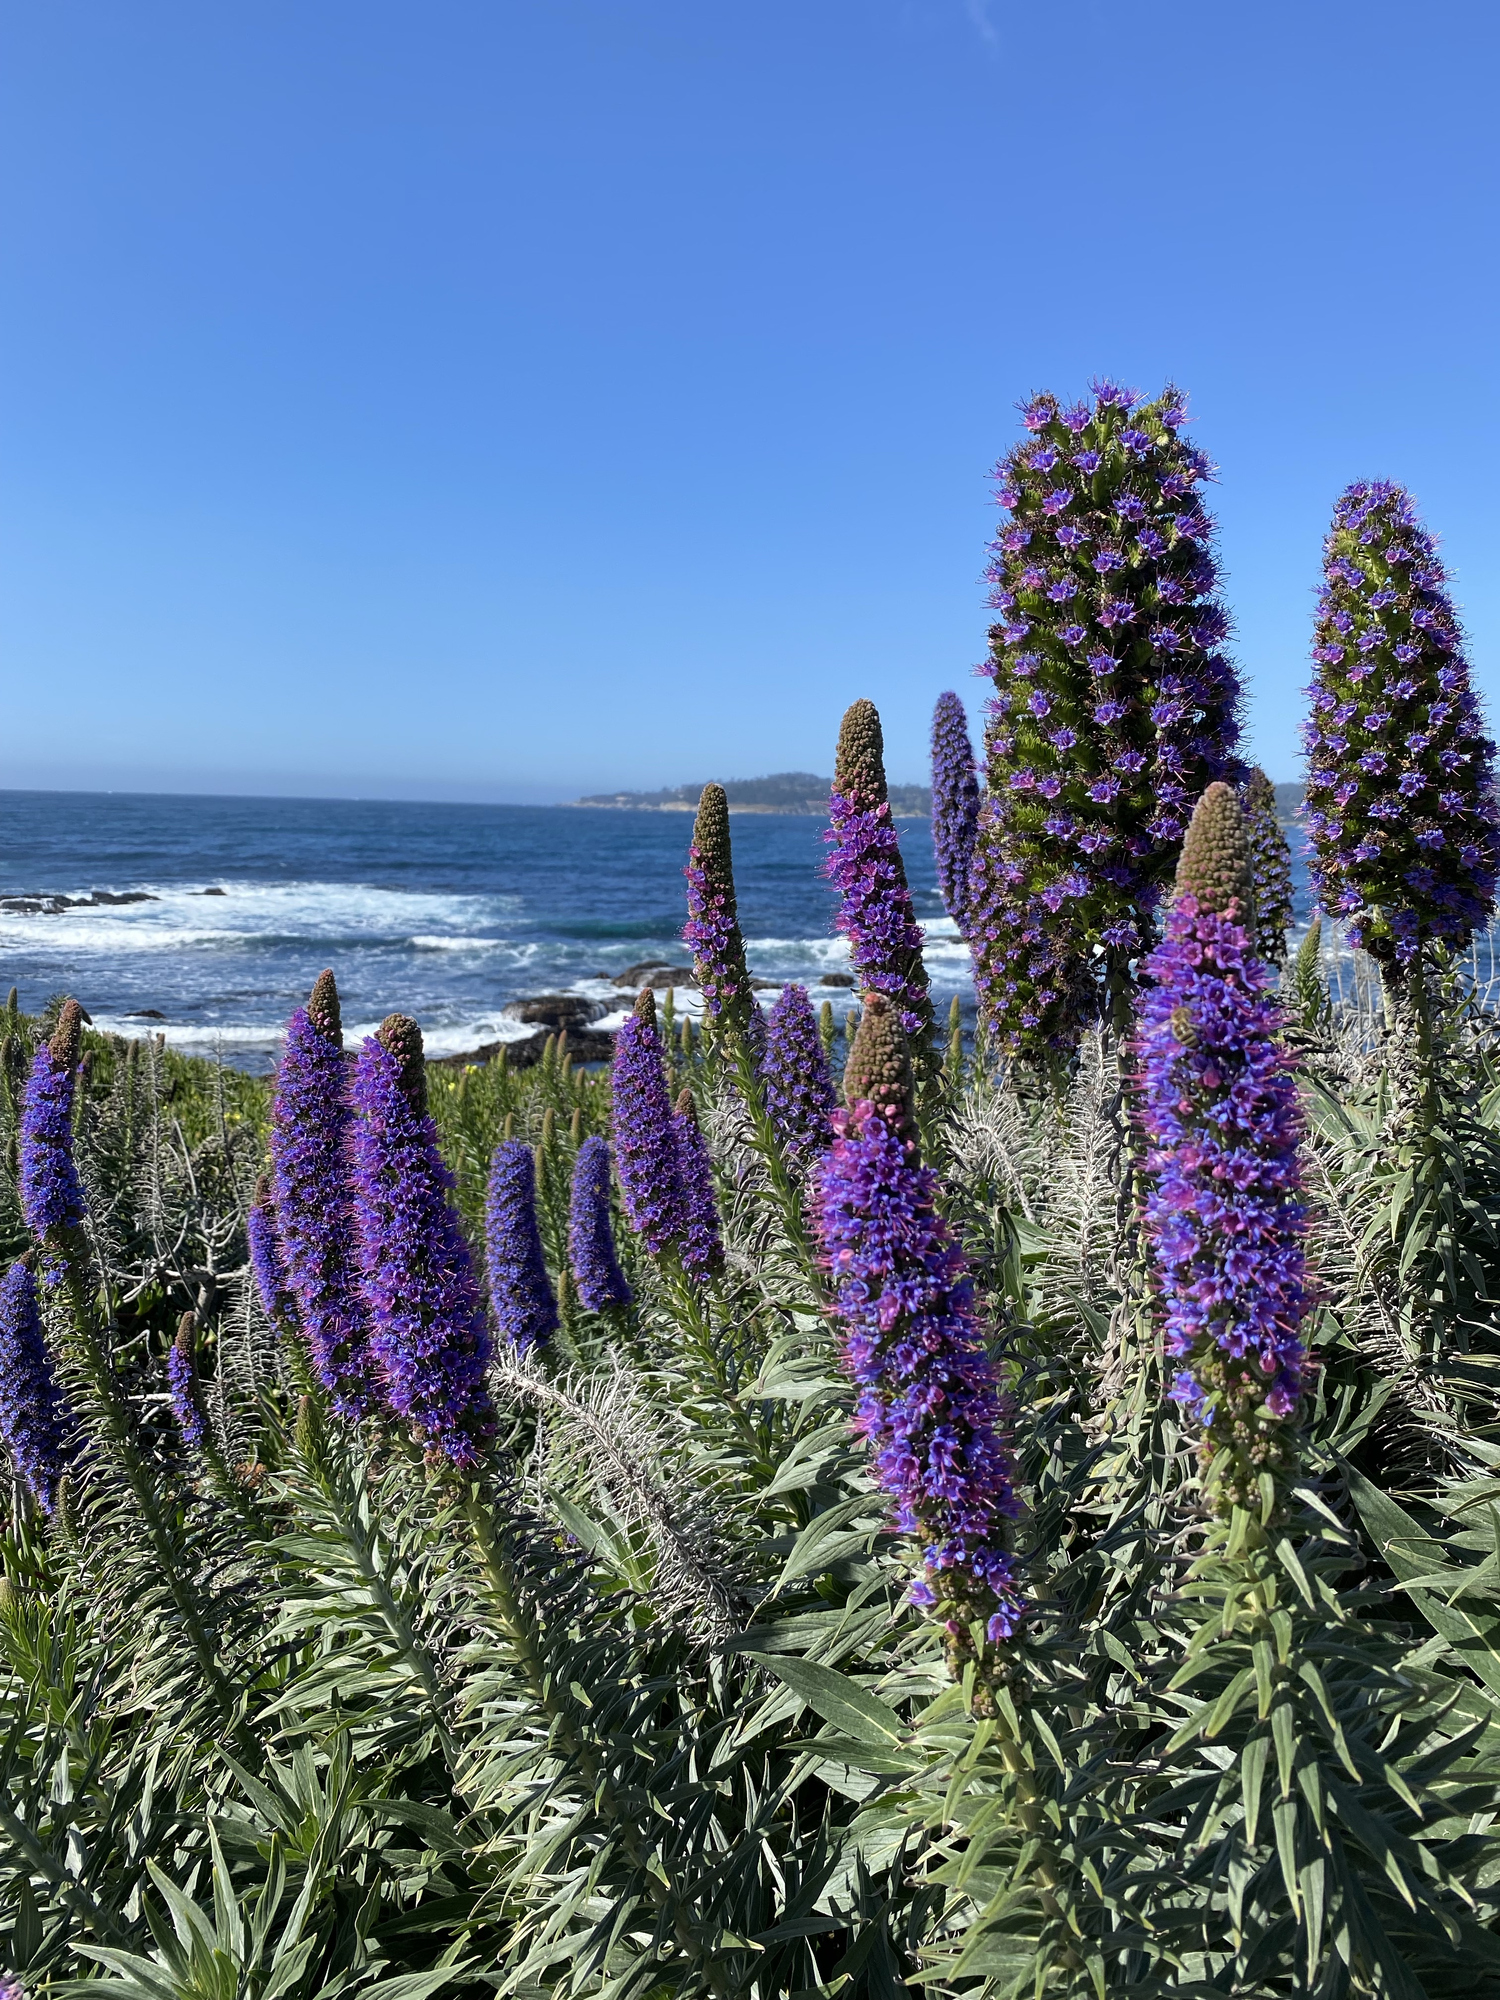 Pacific Coast Highway near Carmel. Flowers with ocean background